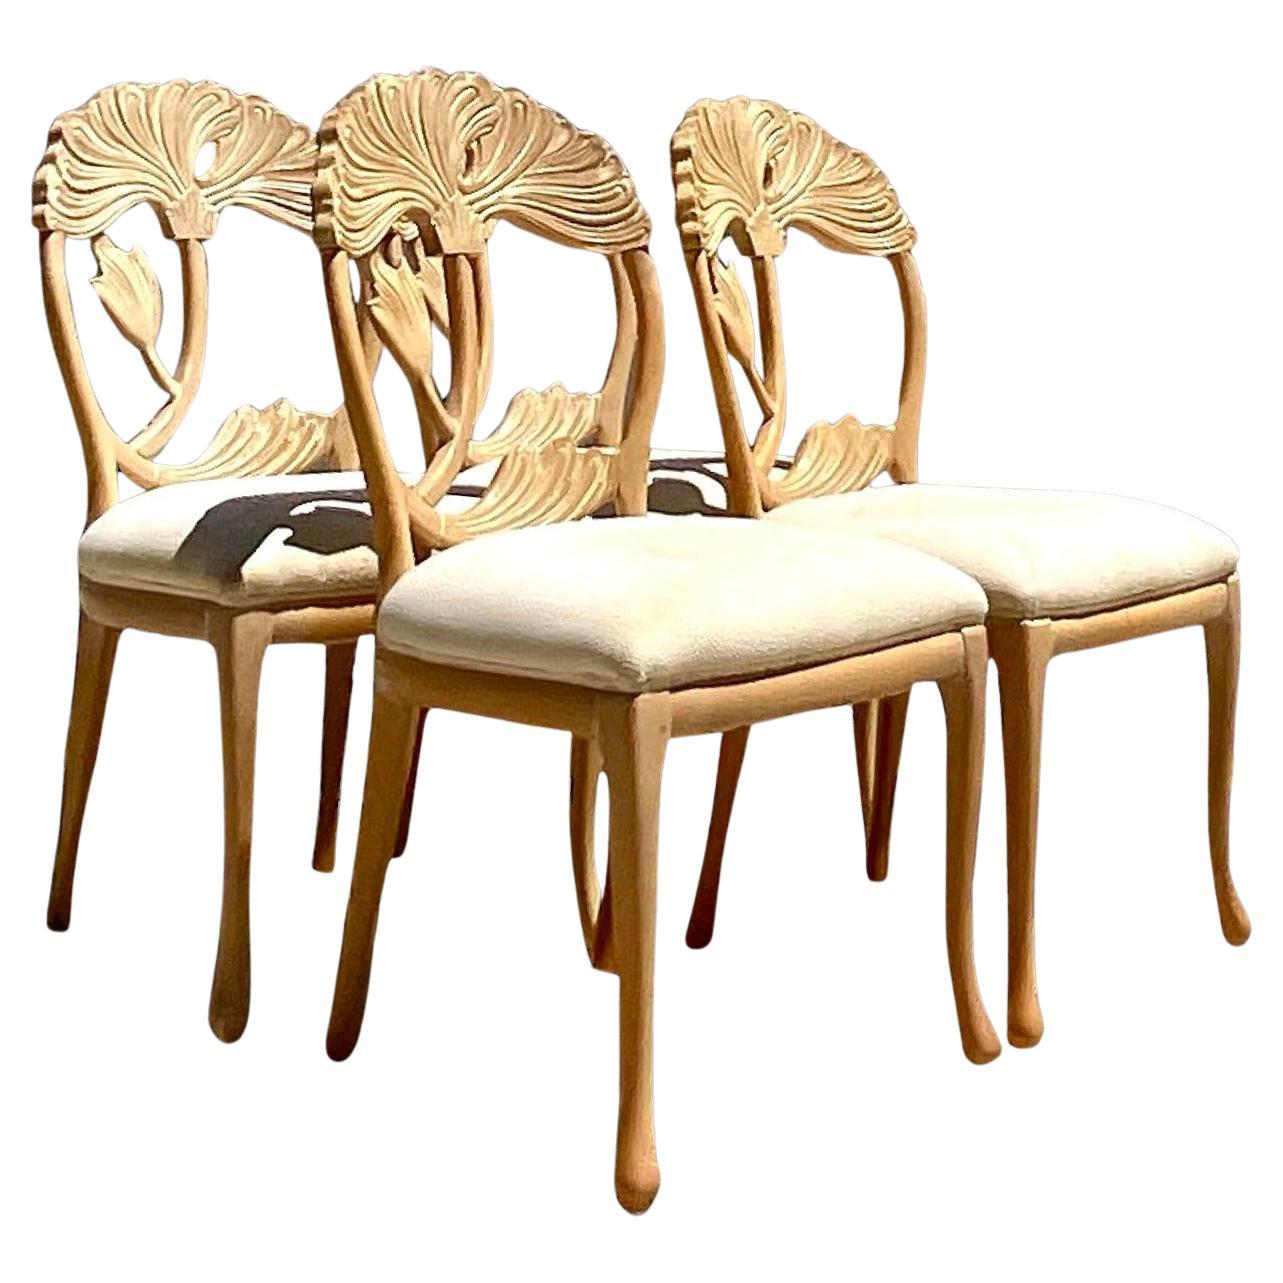 Vintage Boho Carved Lotus Blossom Dining Chairs - Set of 4